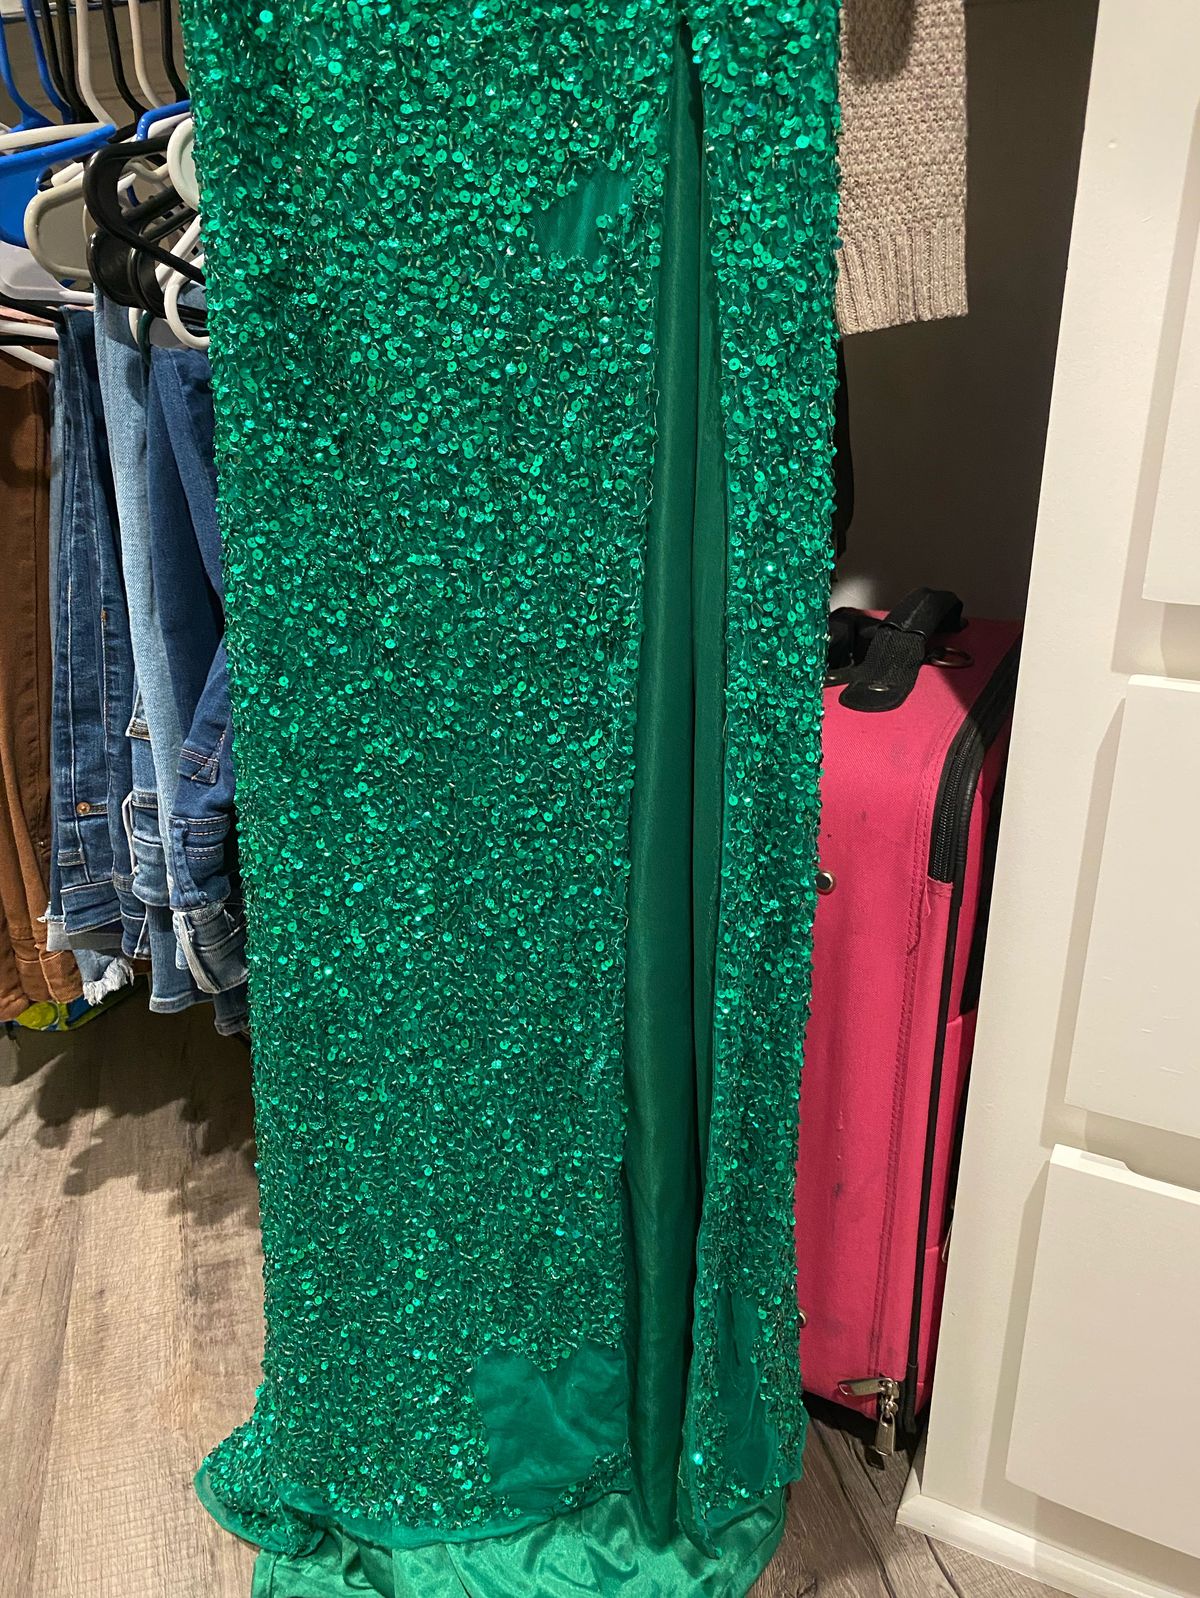 Primavera Size 4 Prom Green Side Slit Dress on Queenly